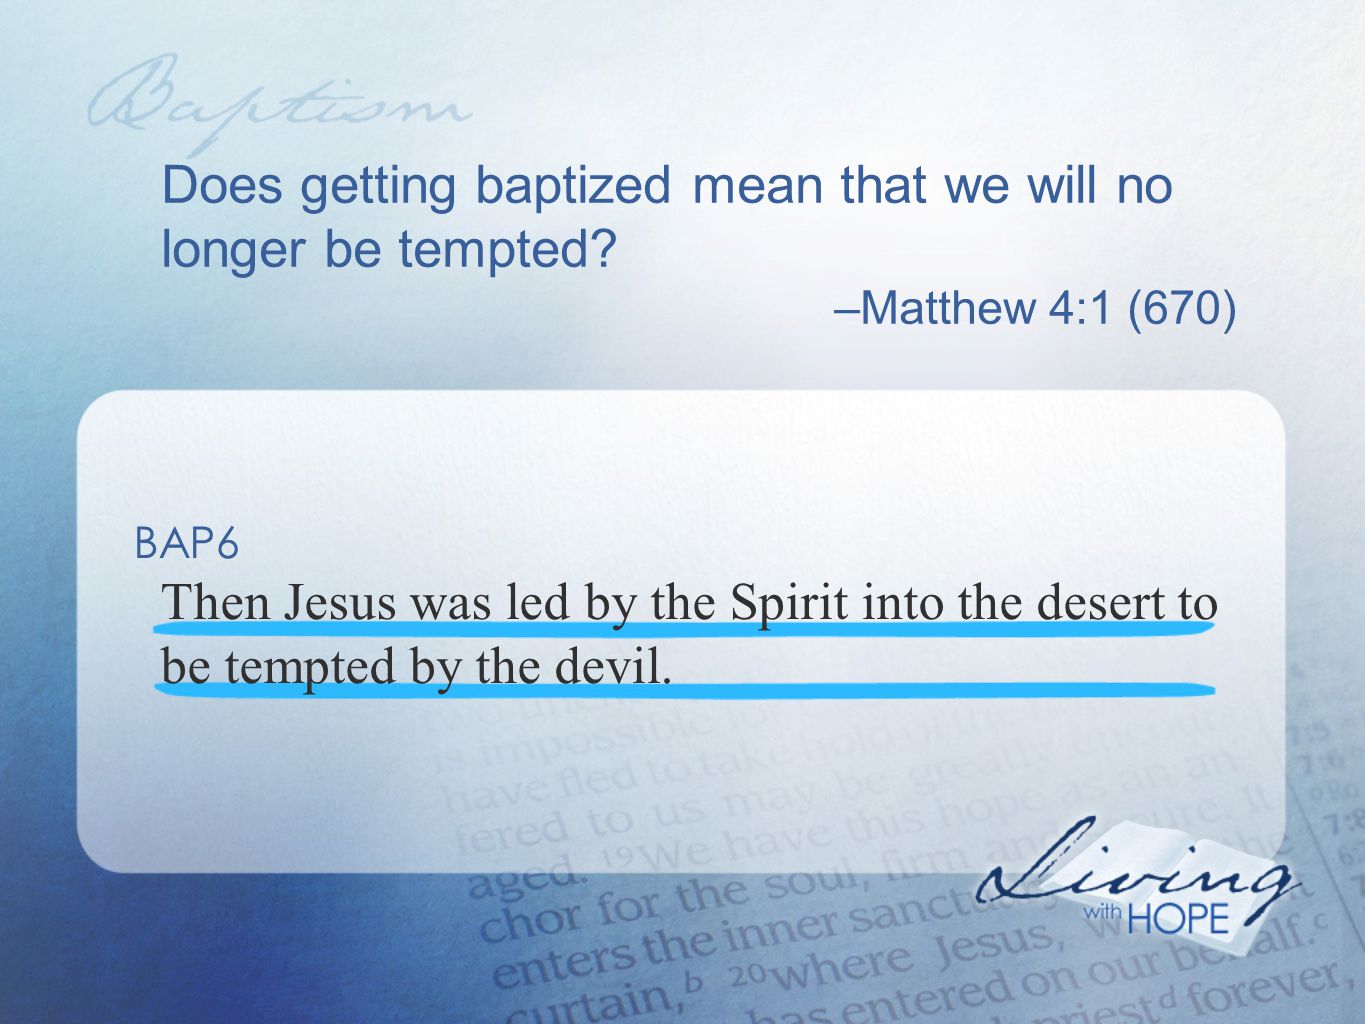 Does getting baptized mean that we will no longer be tempted.